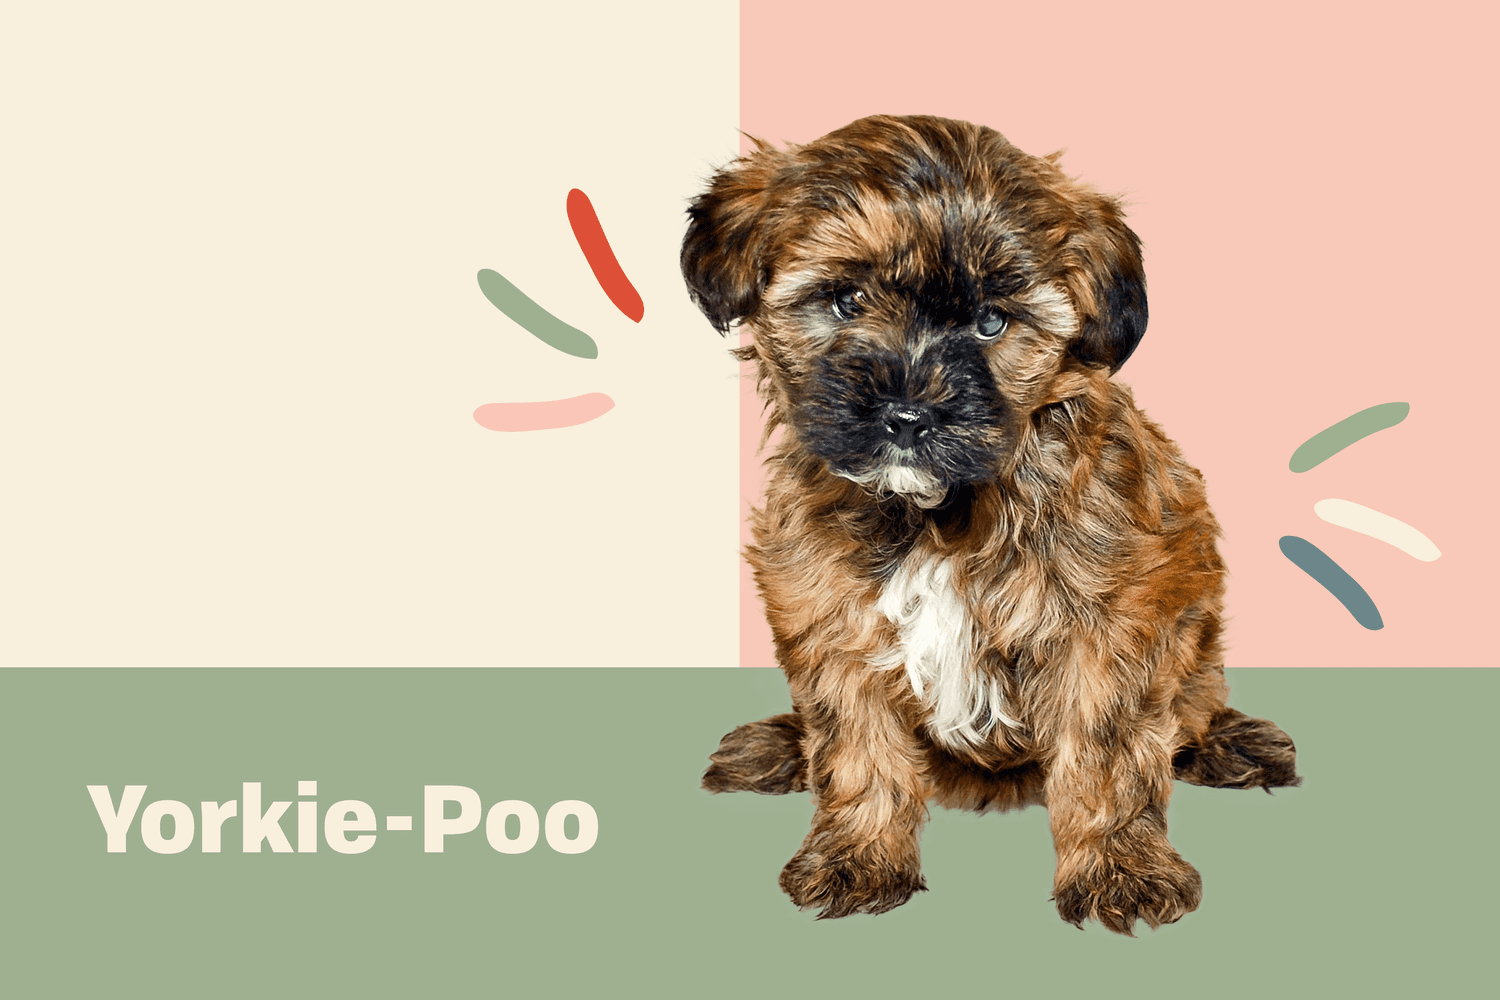 Yorkie-poo portrait with illustrated embellishments